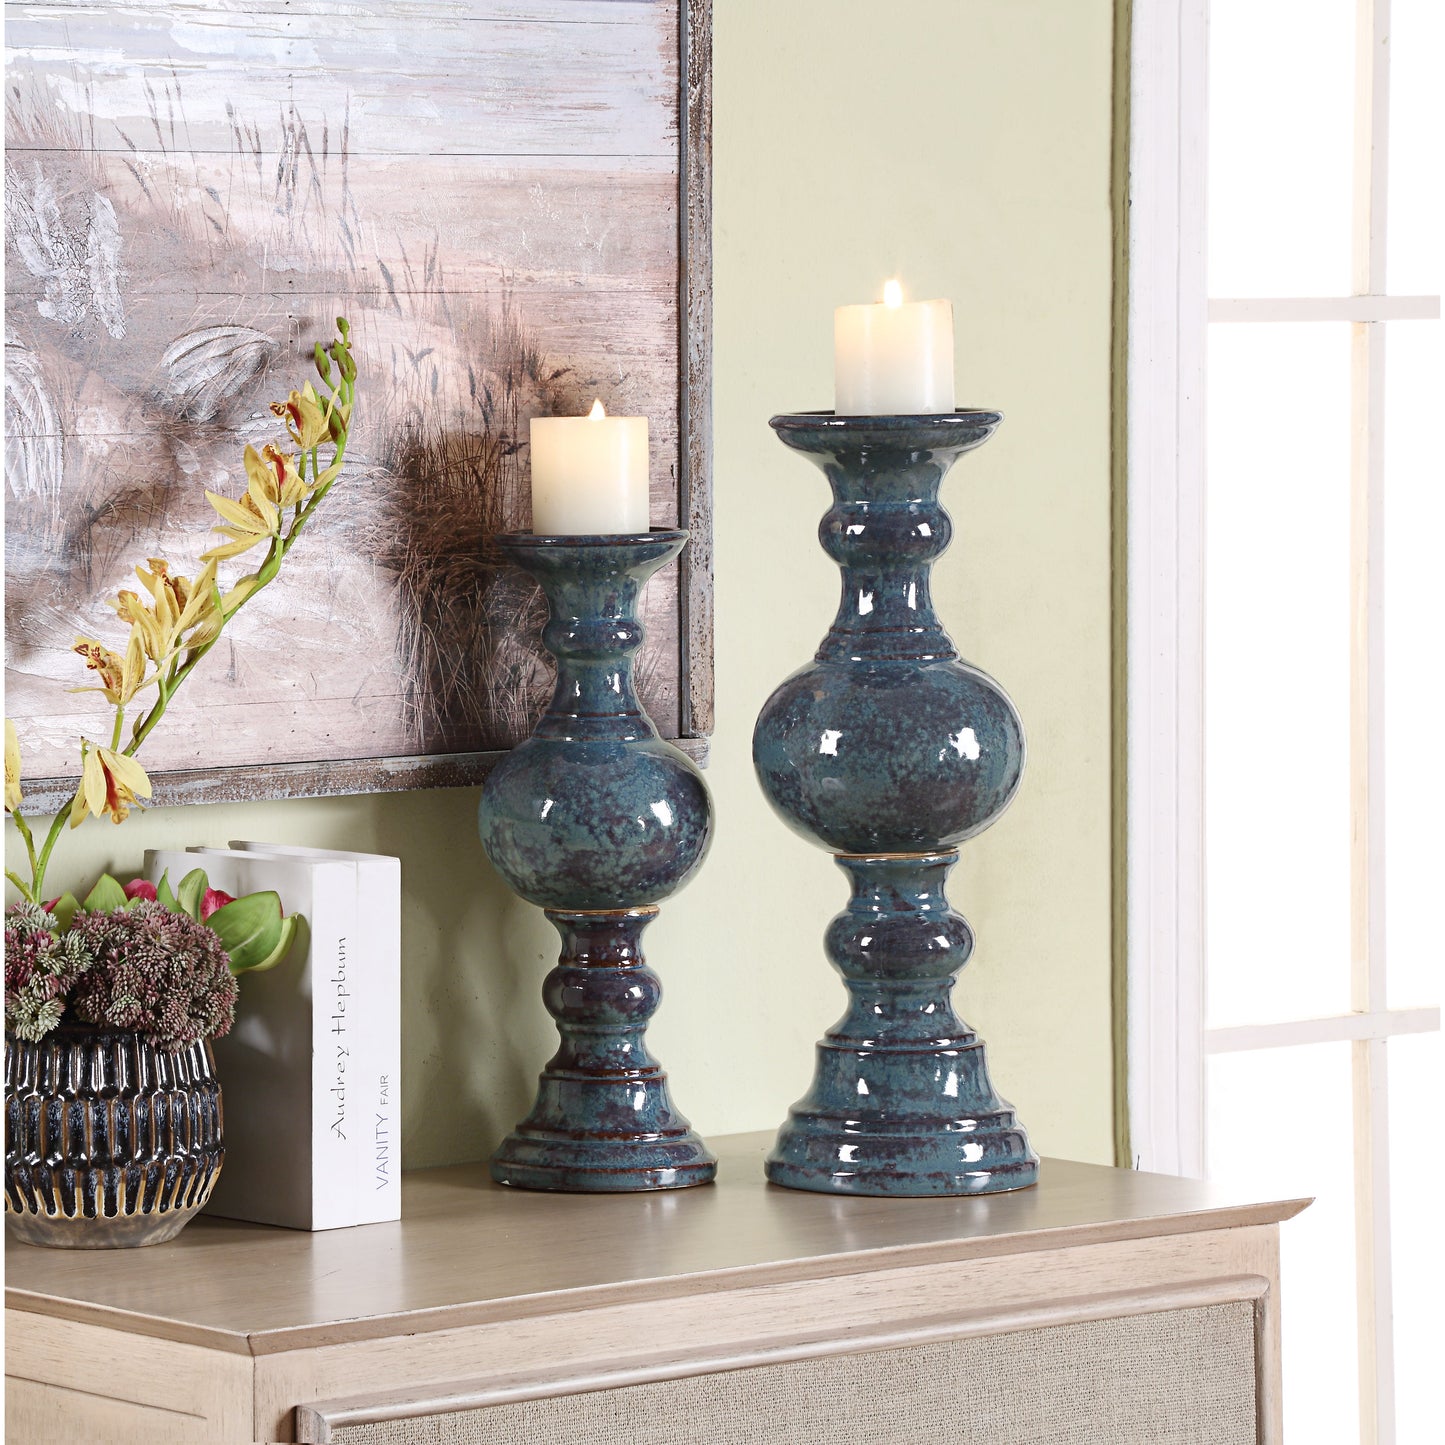 Crestview Collection Barrett 20" & 17" 2-Piece Traditional Ceramic Candle Holder In Teal Marbled and Glazed Finish